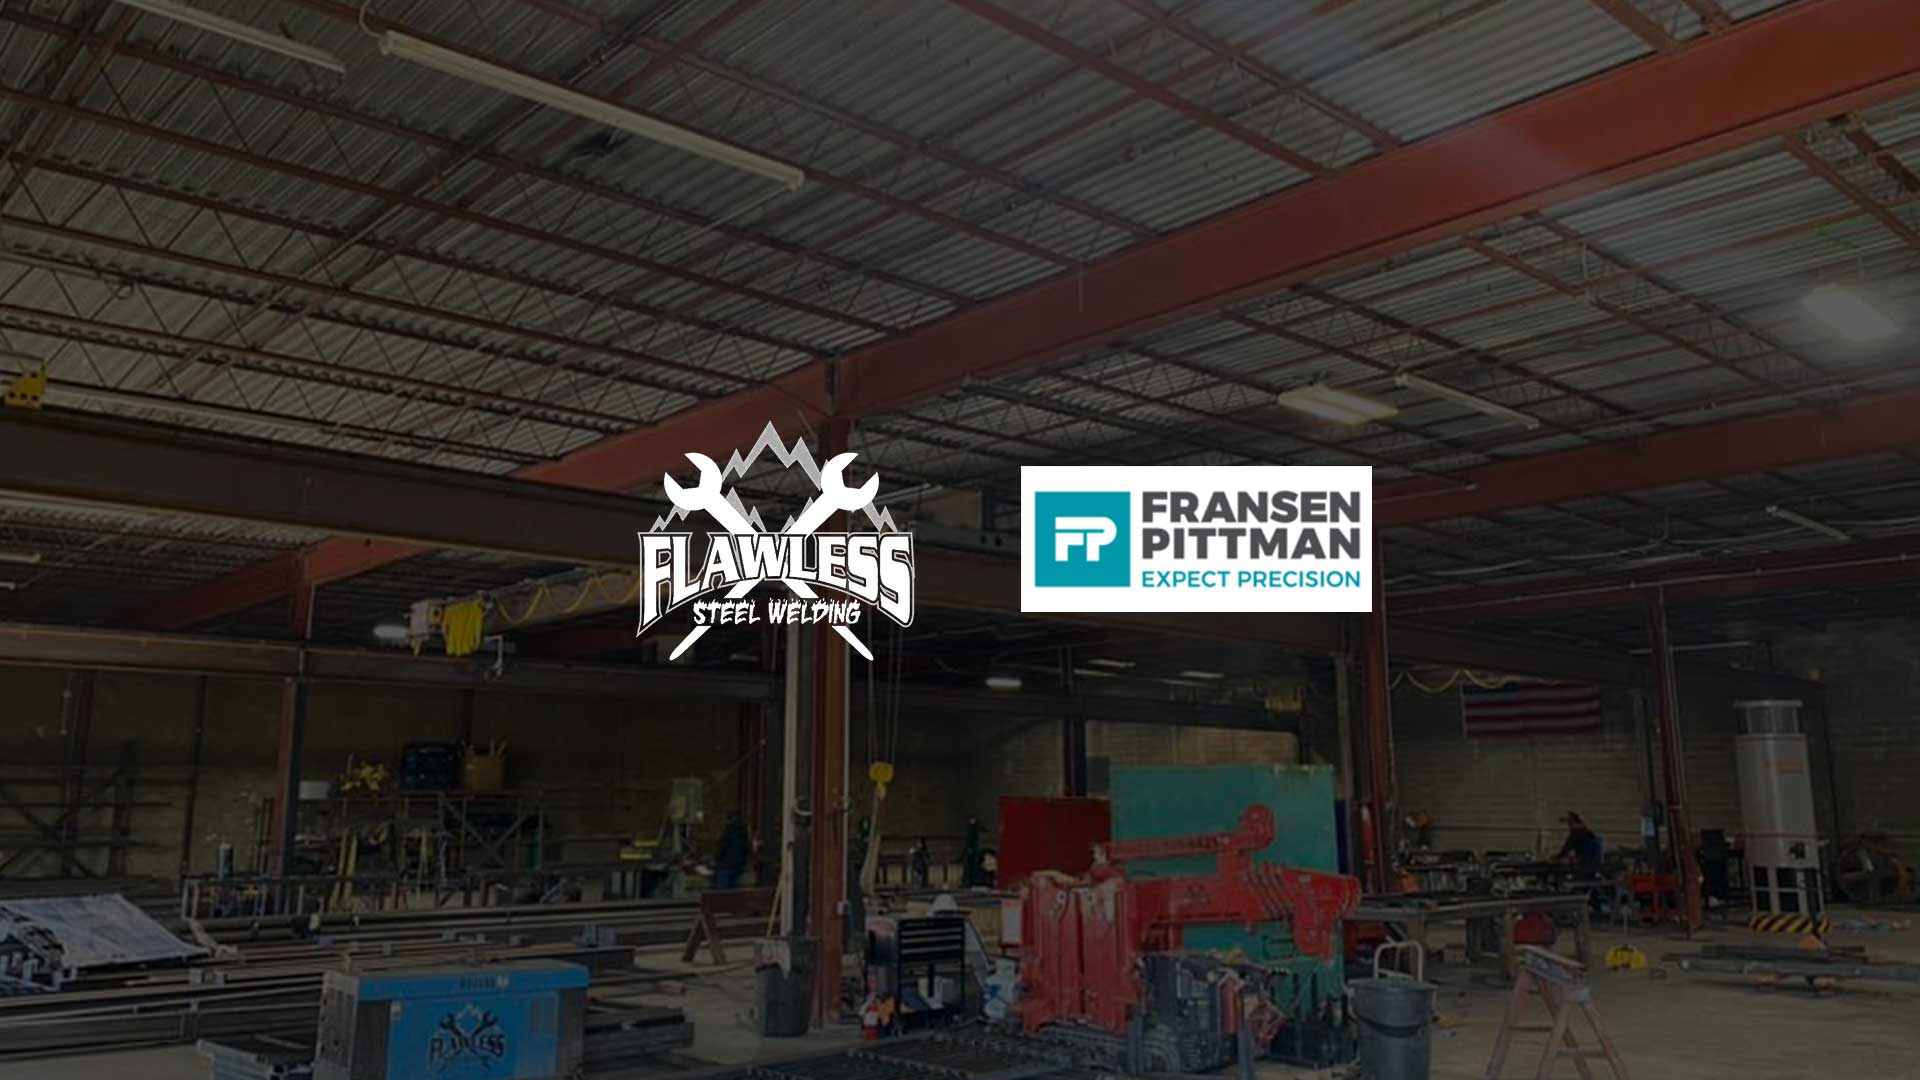 Flawless Steel Welding Logo and Fransen Pittman Expect Precision's logo against a steel fabrication facility background.